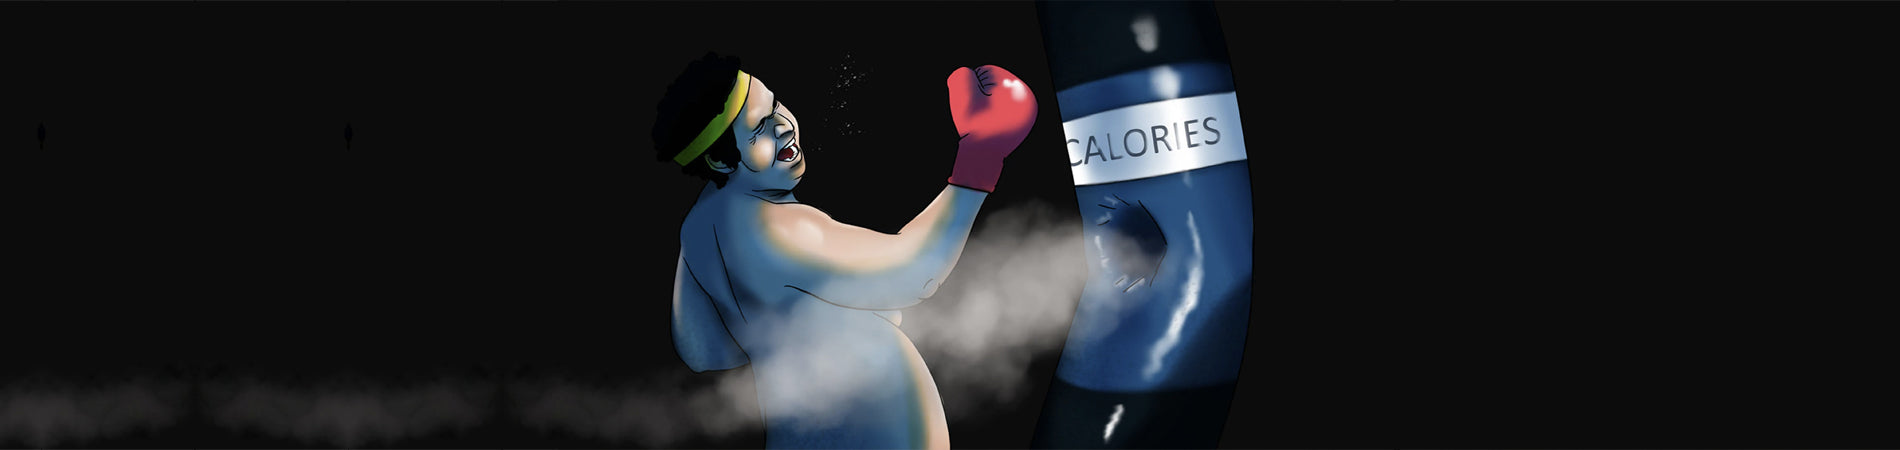 Boxing Workouts to Help You Knockout Your Body Fat